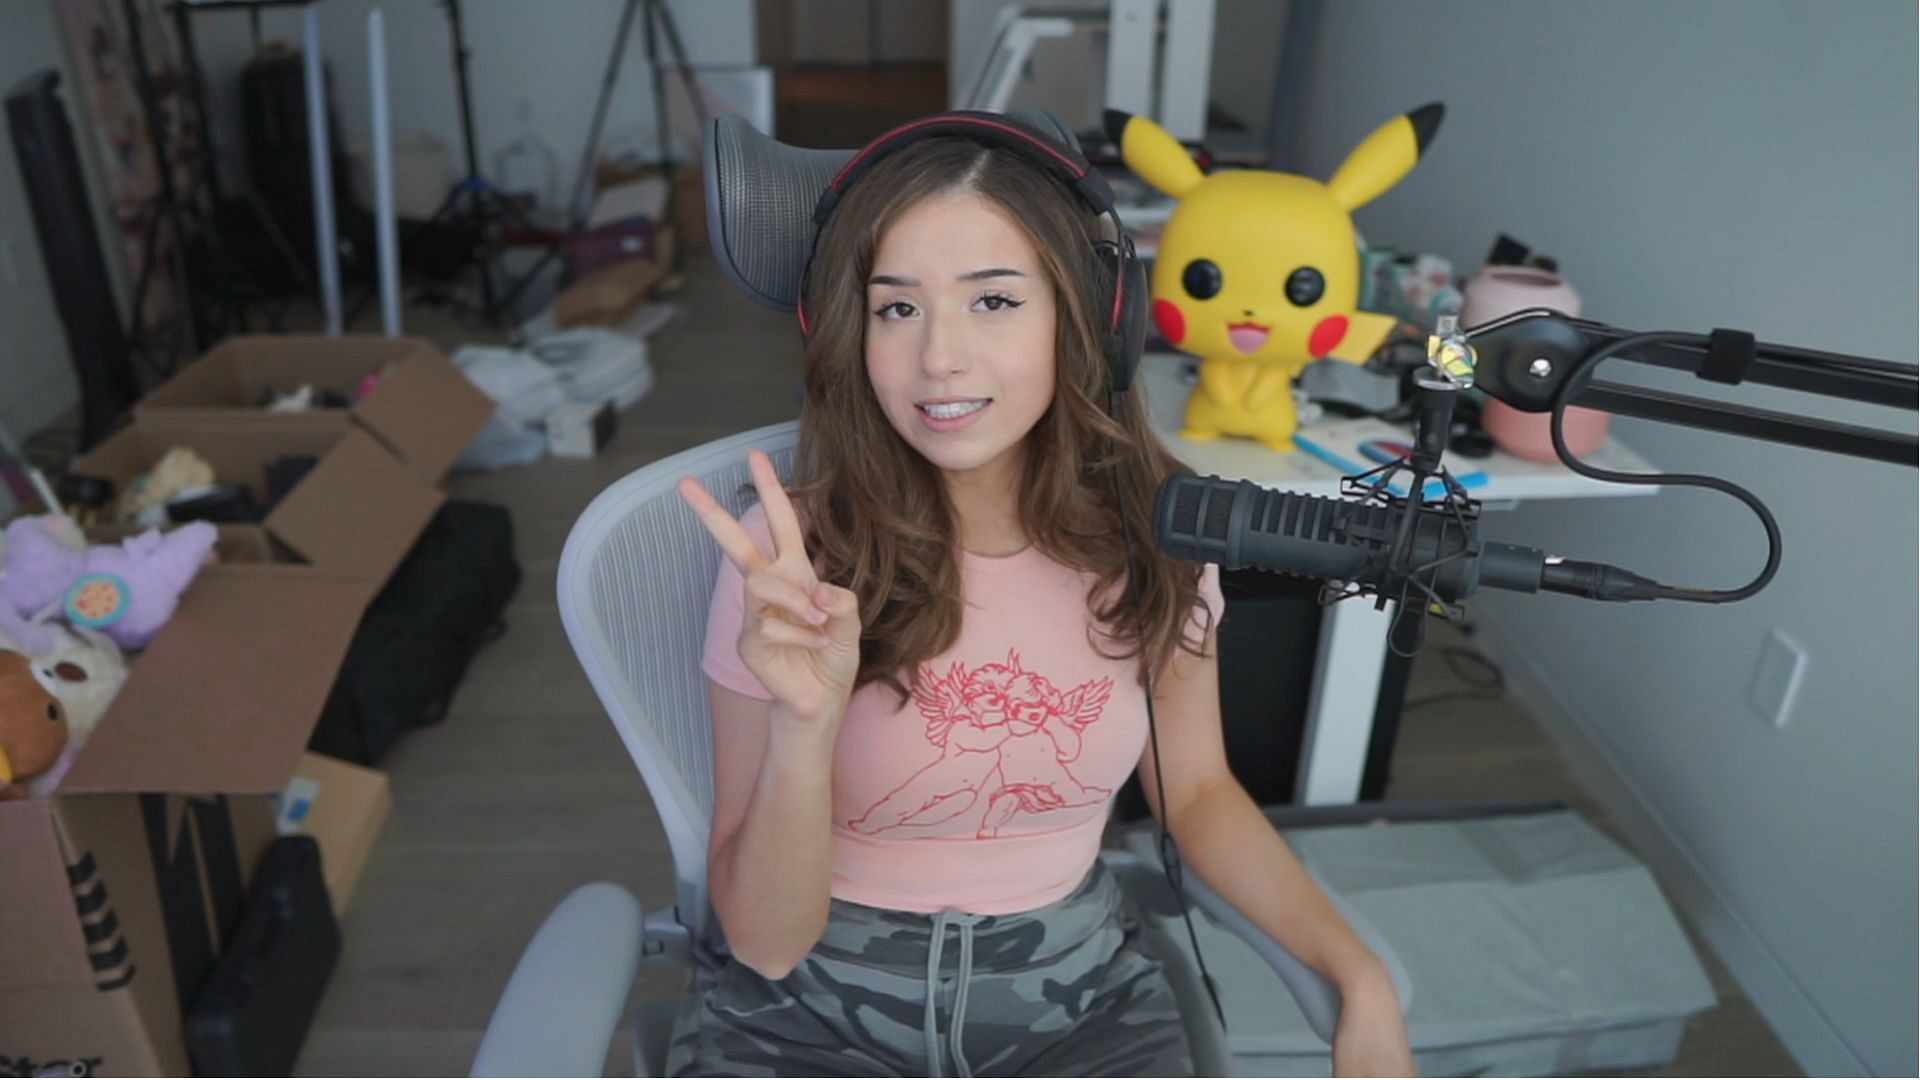 Twitch streamer Imane has recently shifted to a new apartment (Image via- Pokimane/Twitch)